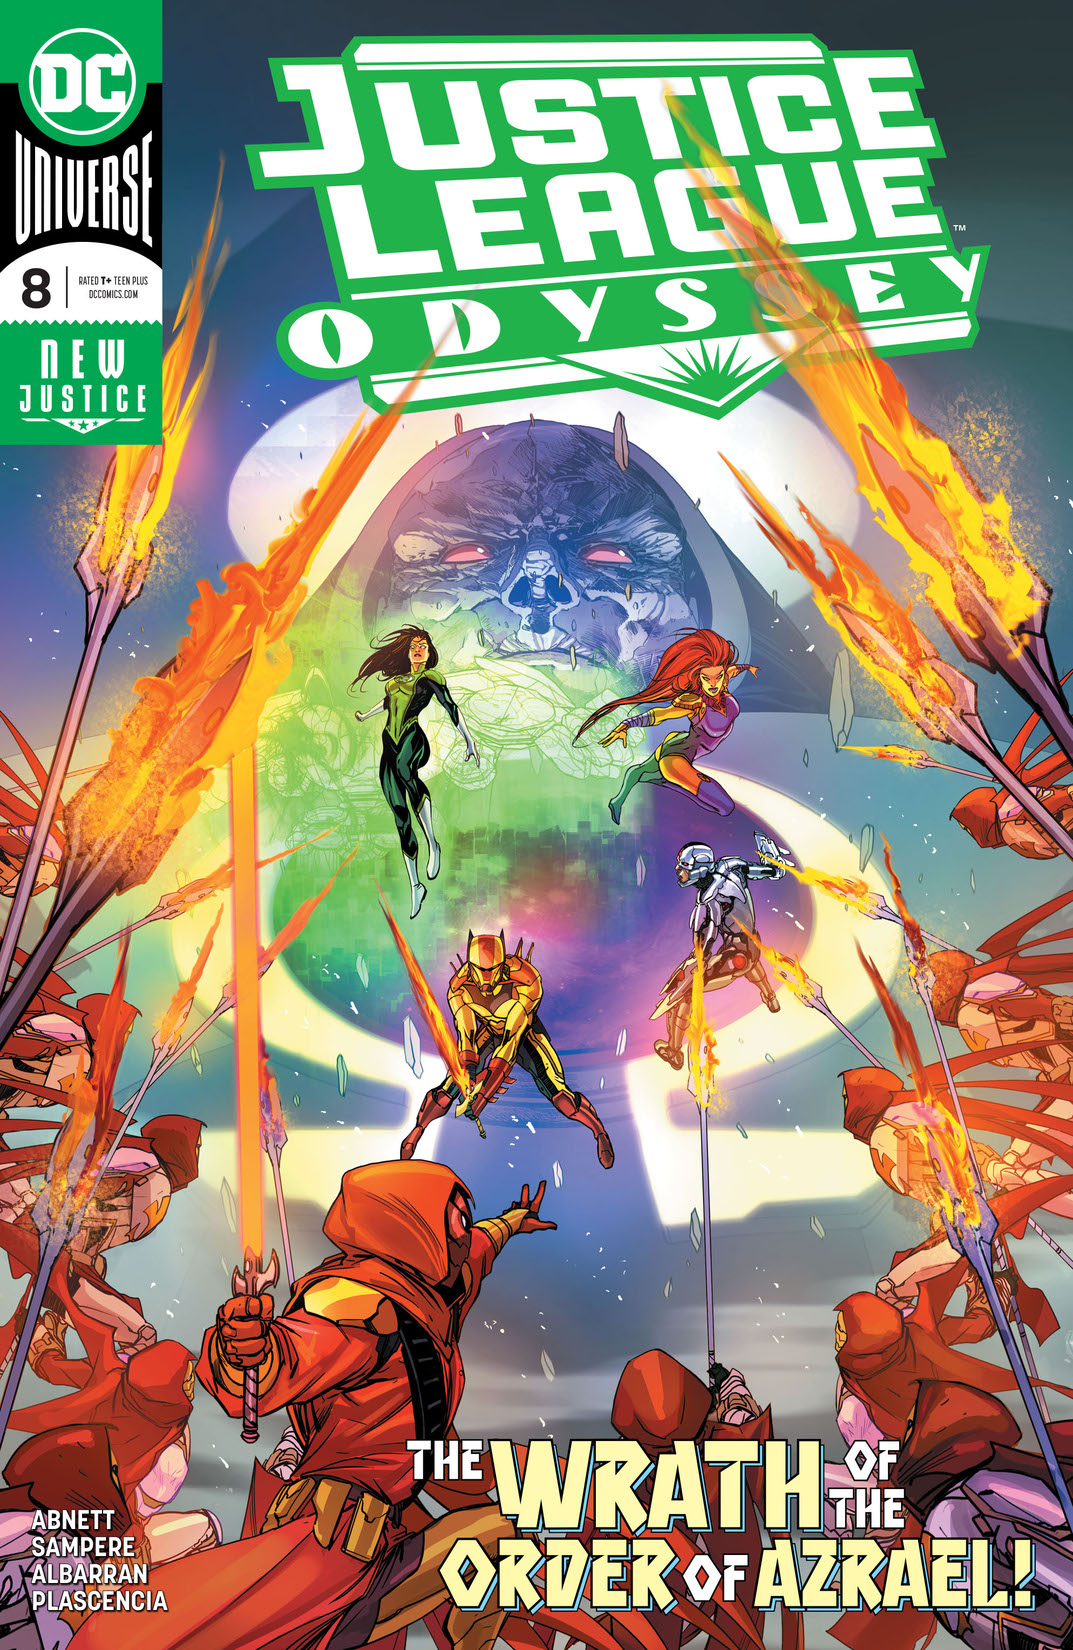 Justice League Odyssey #8 preview images